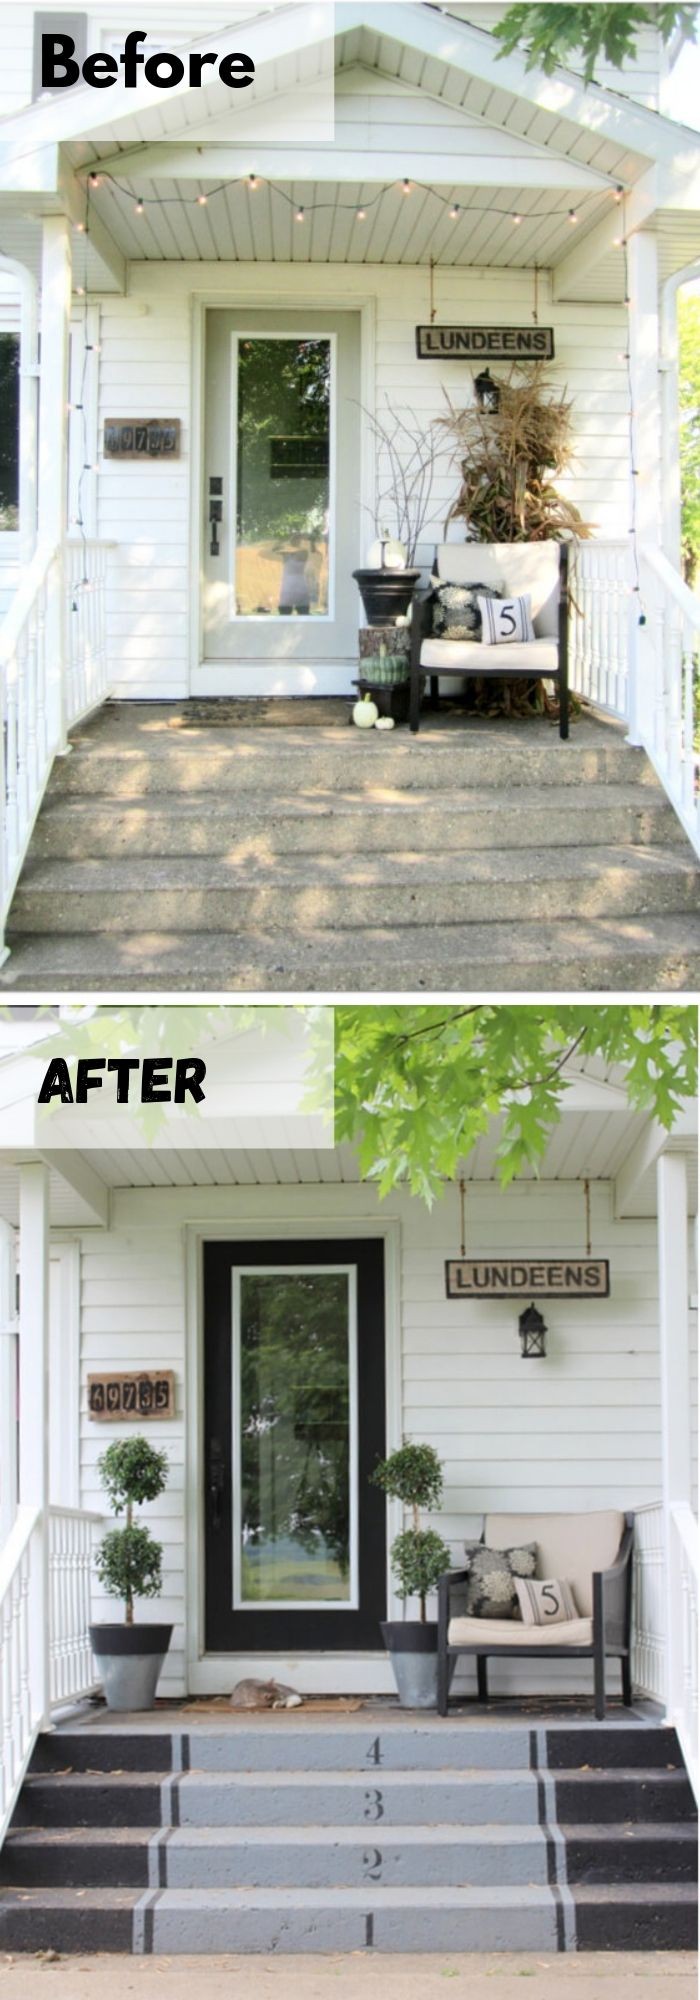 15+ Diy Porch Decoration Ideas For This Summer